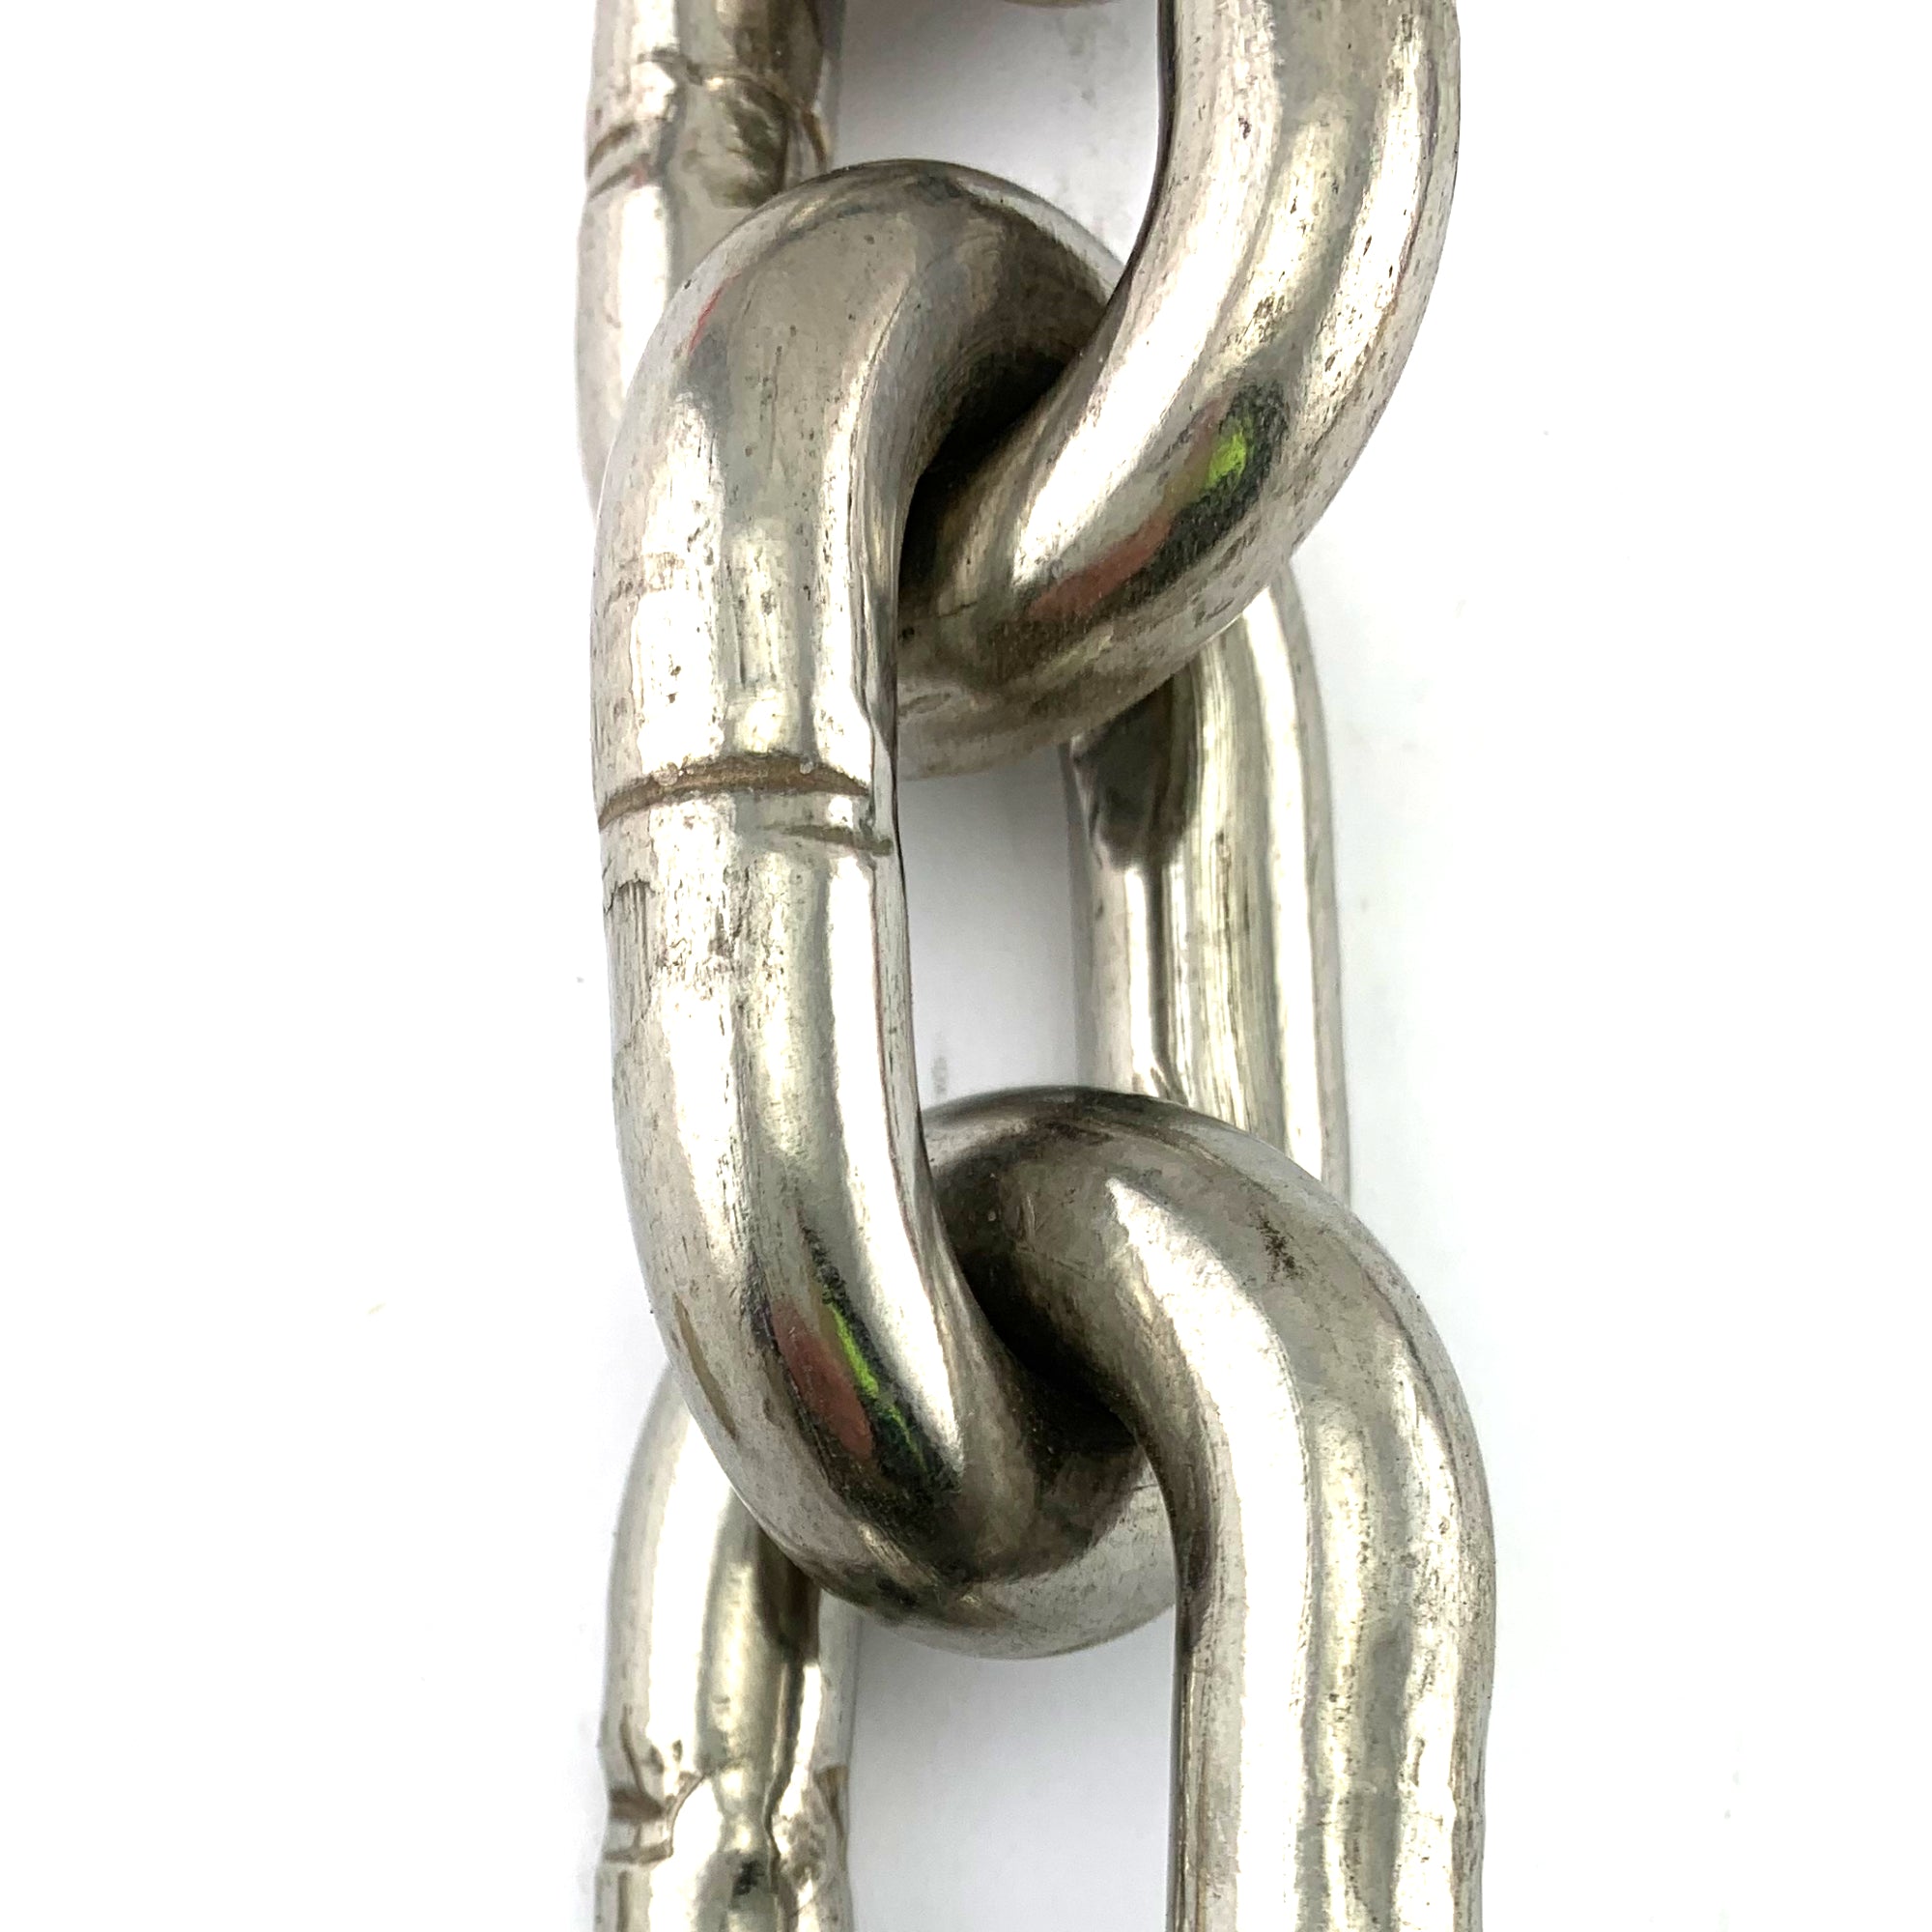 13mm stainless steel welded link chain in a 25kg bucket, with 7.5 metres of chain. Melbourne, Australia.